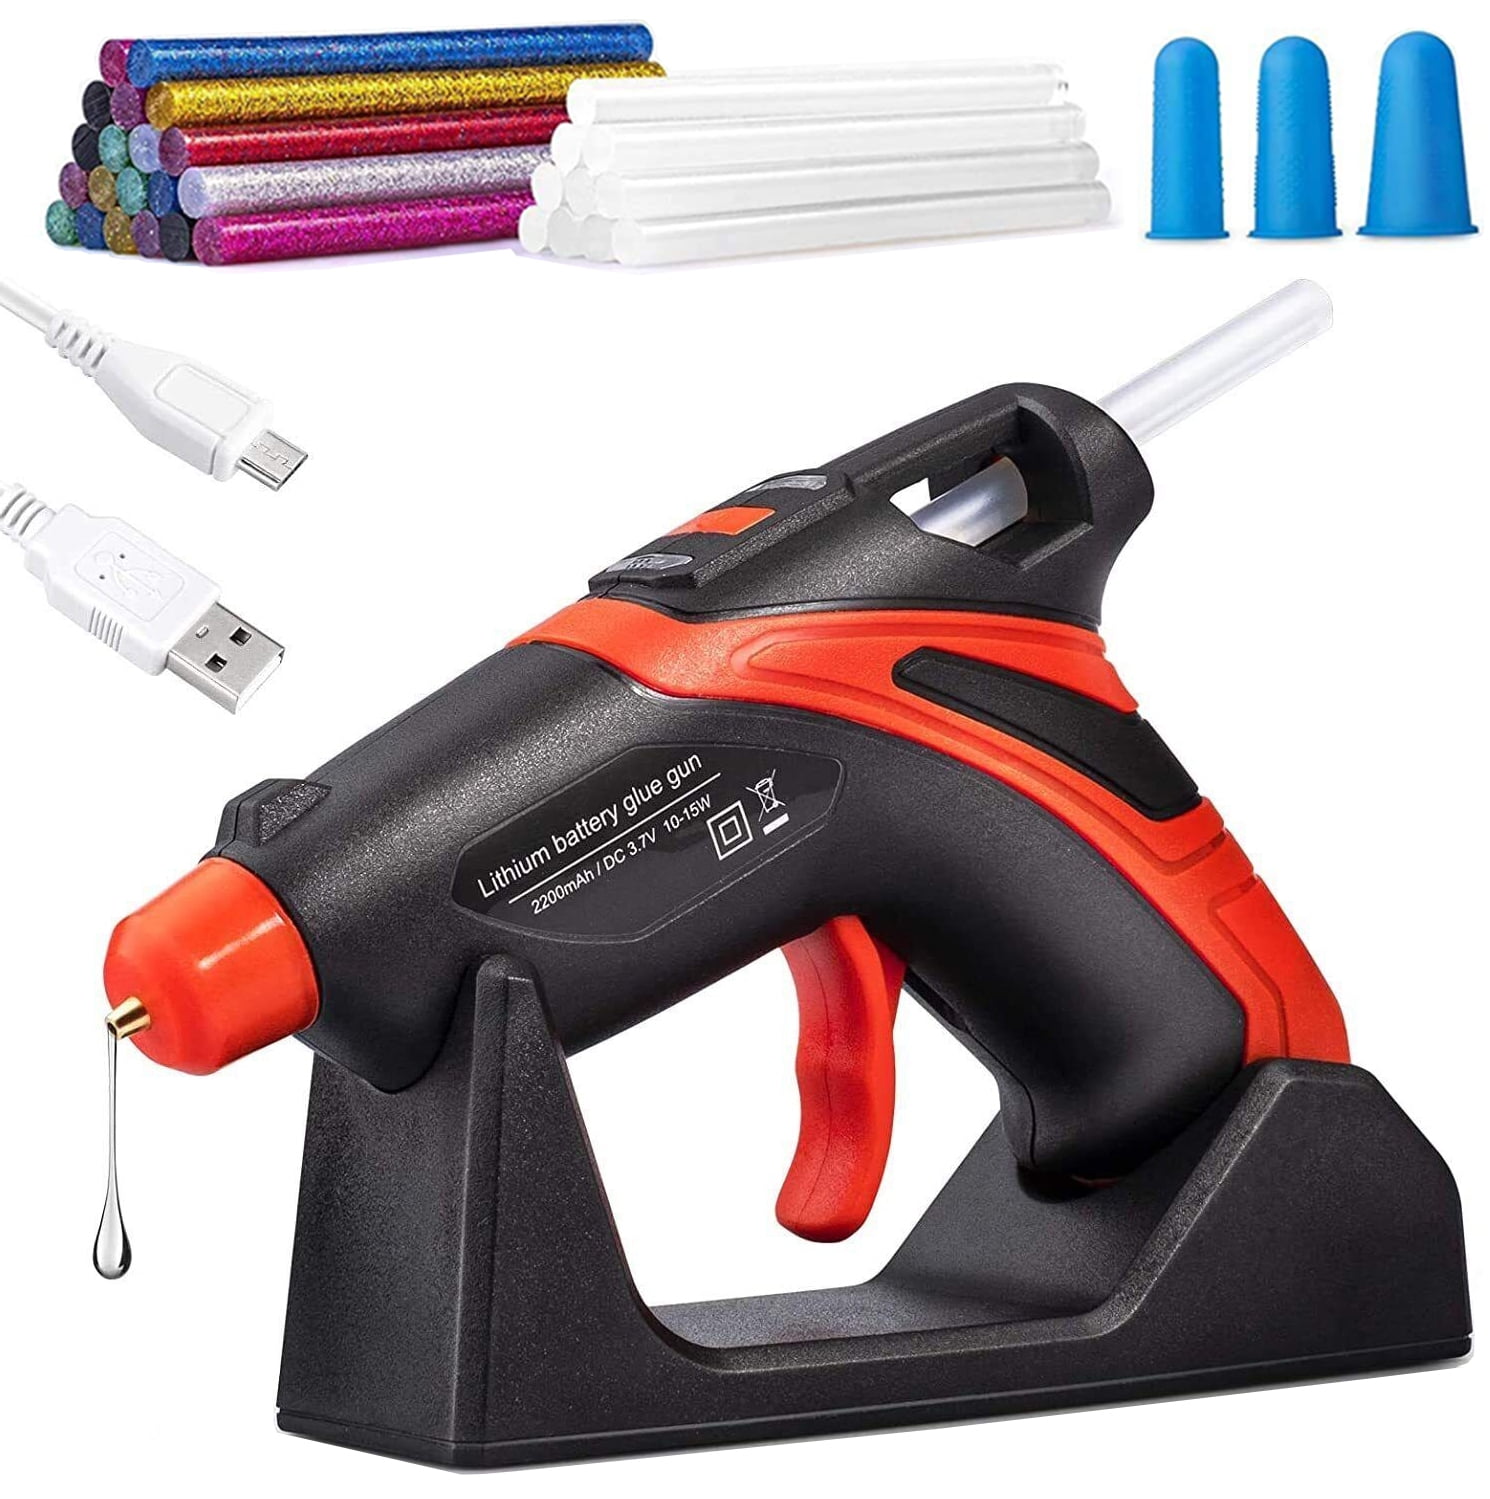 5400MAh Cordless Hot Melt Glue Gun With 100/50/20pc Glue Sticks Copper  Nozzle Rechargeable Hot Glue Gun – the best products in the Joom Geek  online store